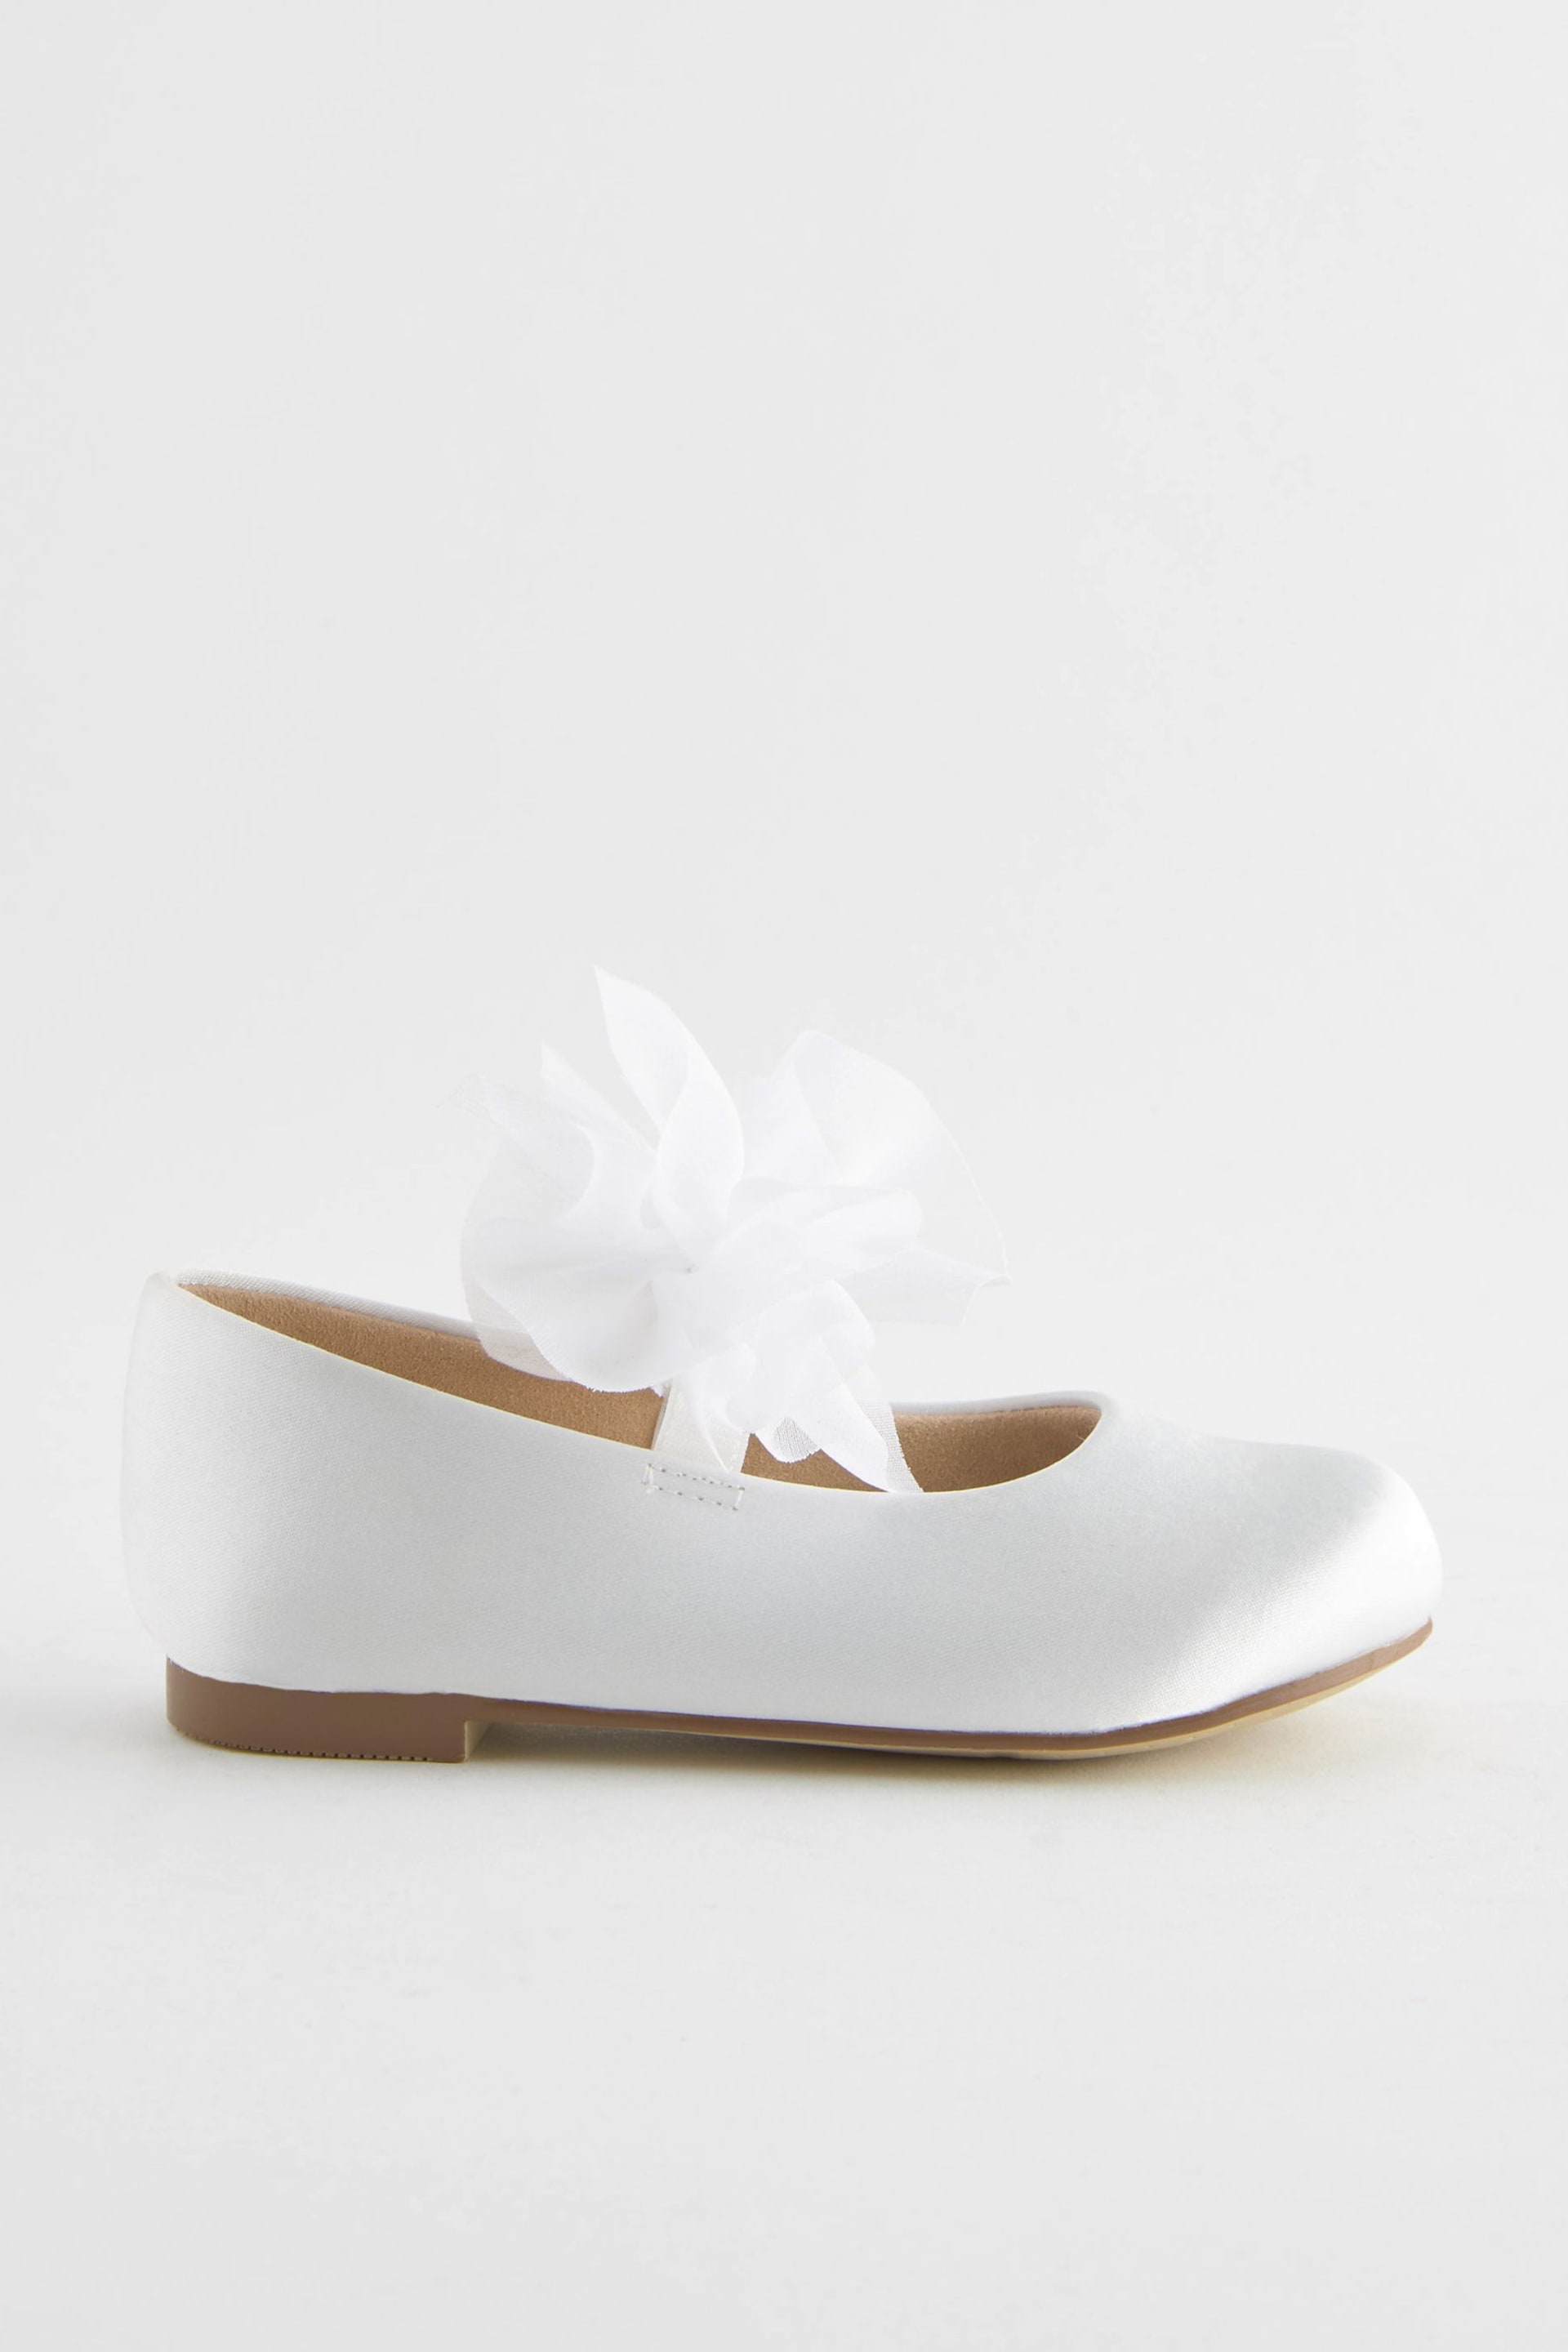 White Wide Fit (G) Mary Jane Bridesmaid Bow Occasion Shoes - Image 2 of 5